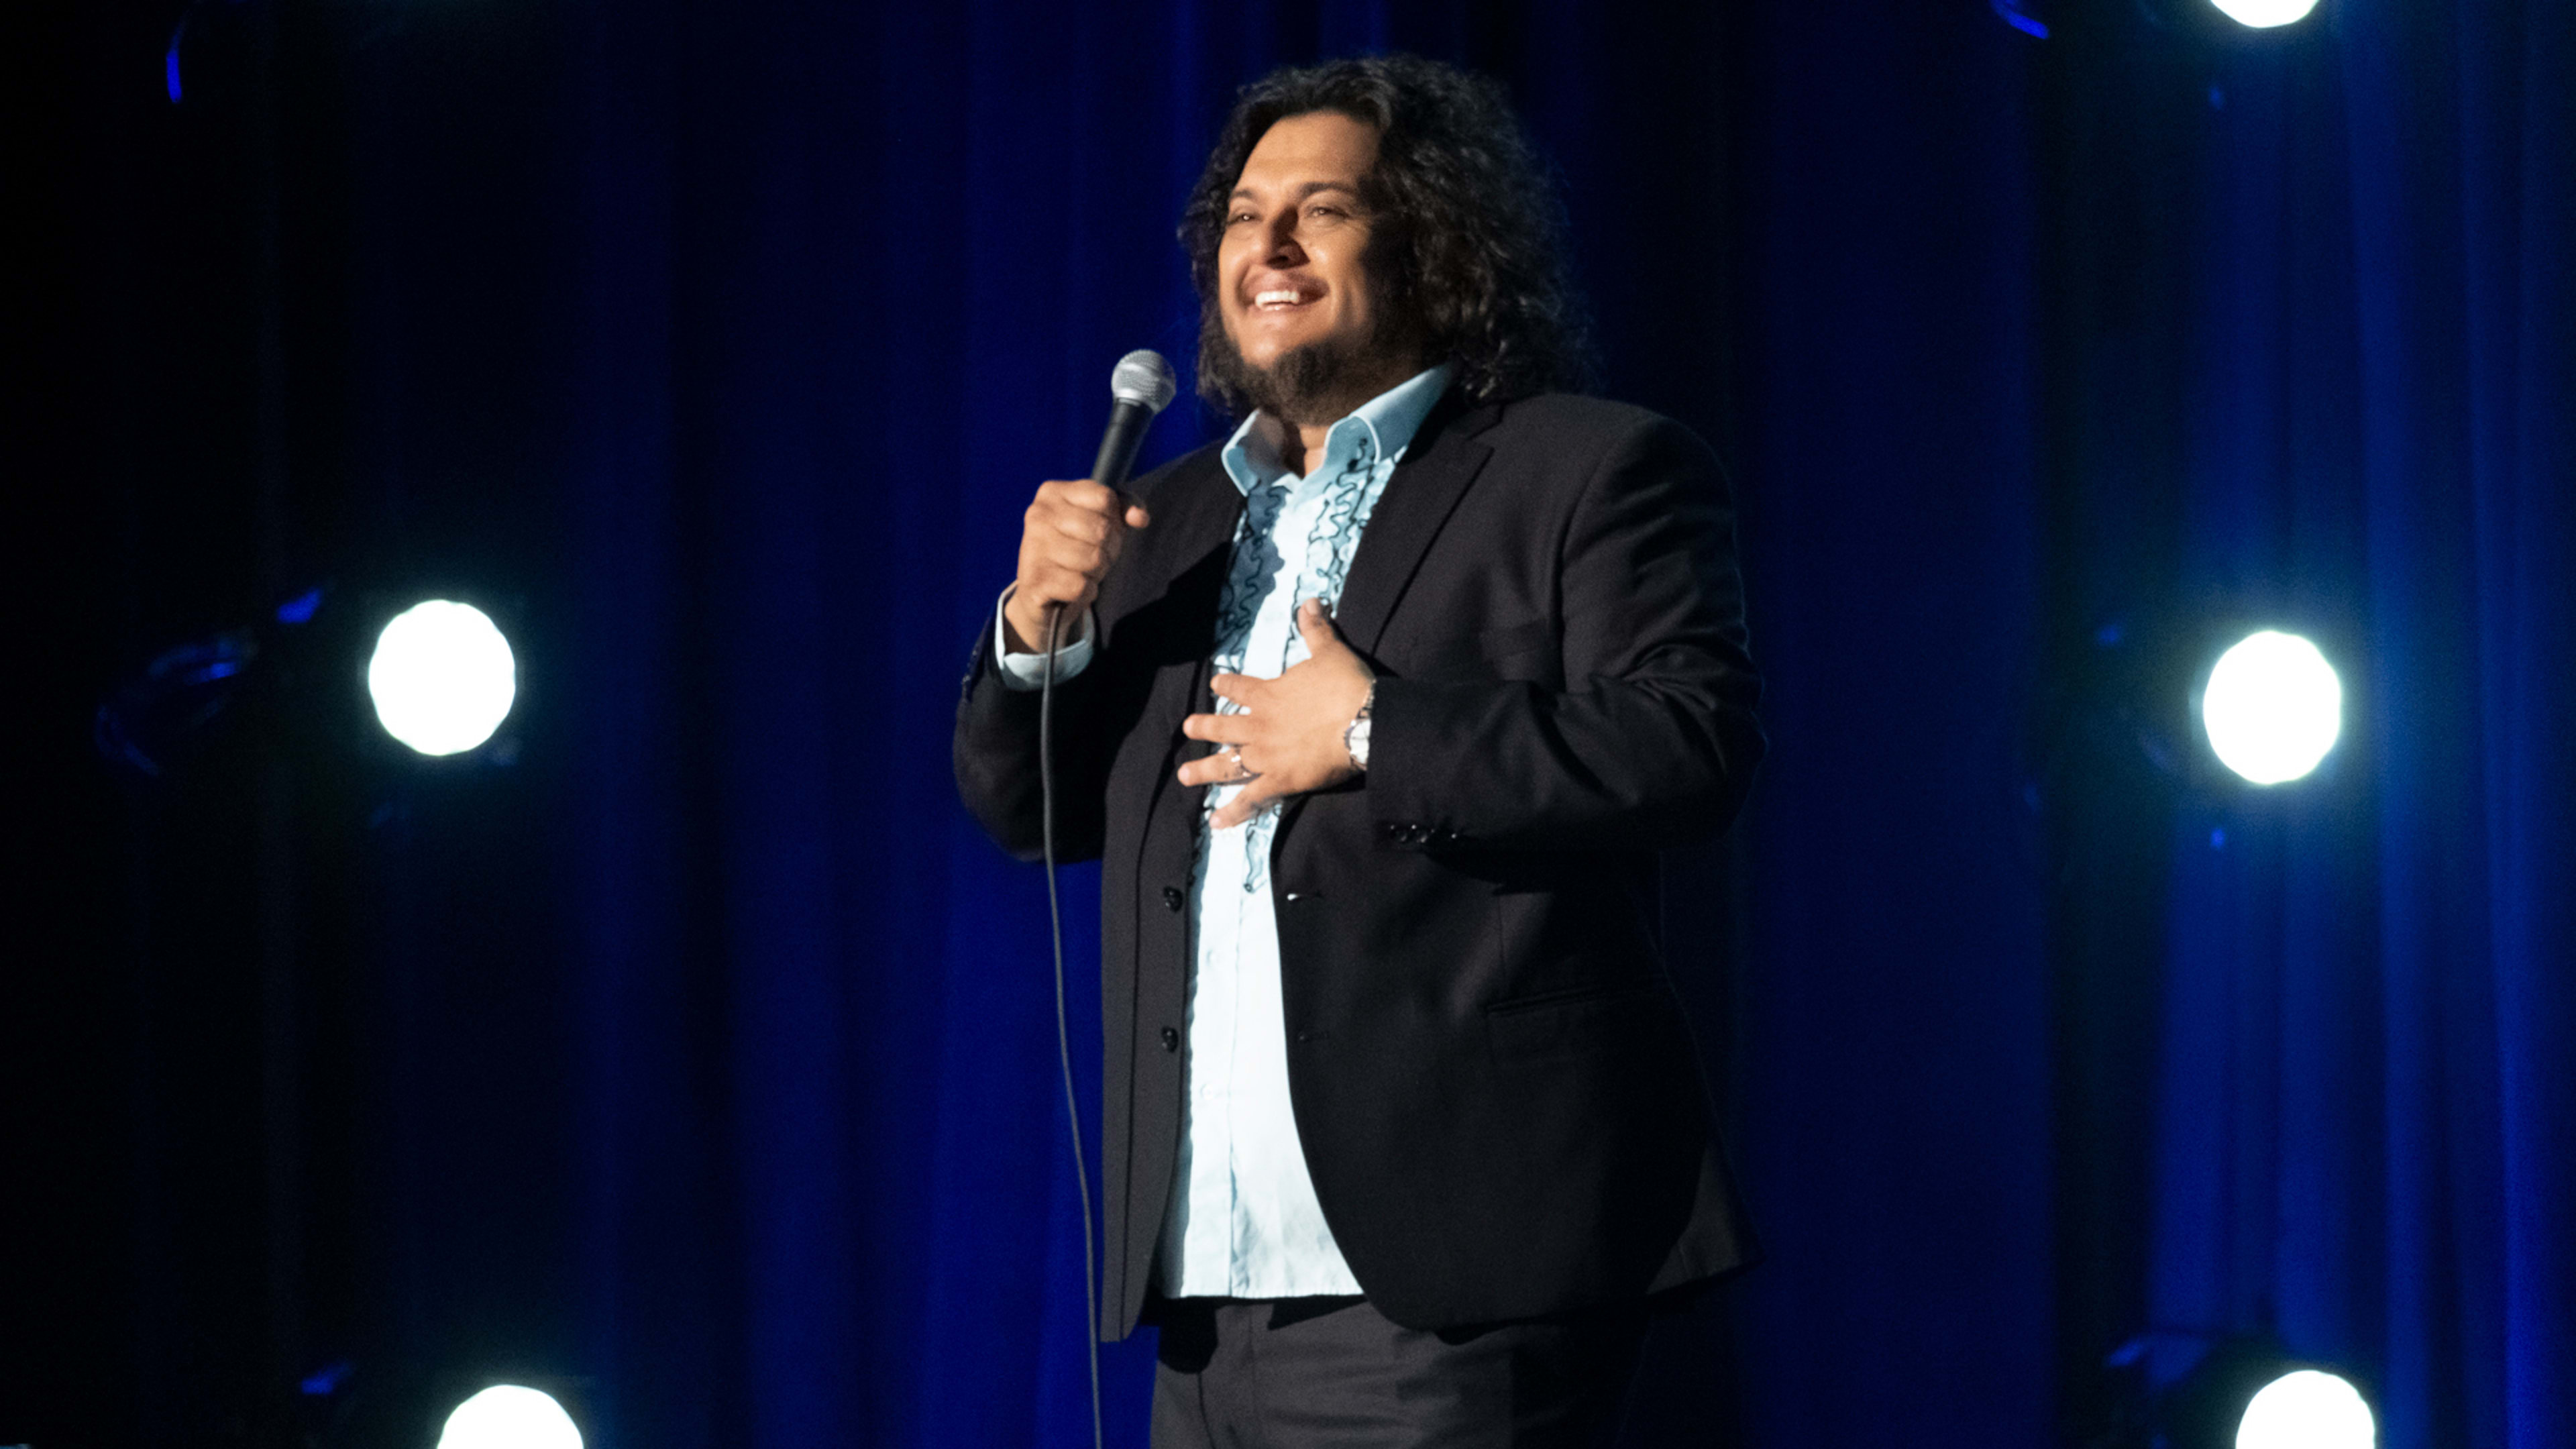 With his bilingual Netflix special, Felipe Esparza is found in translation